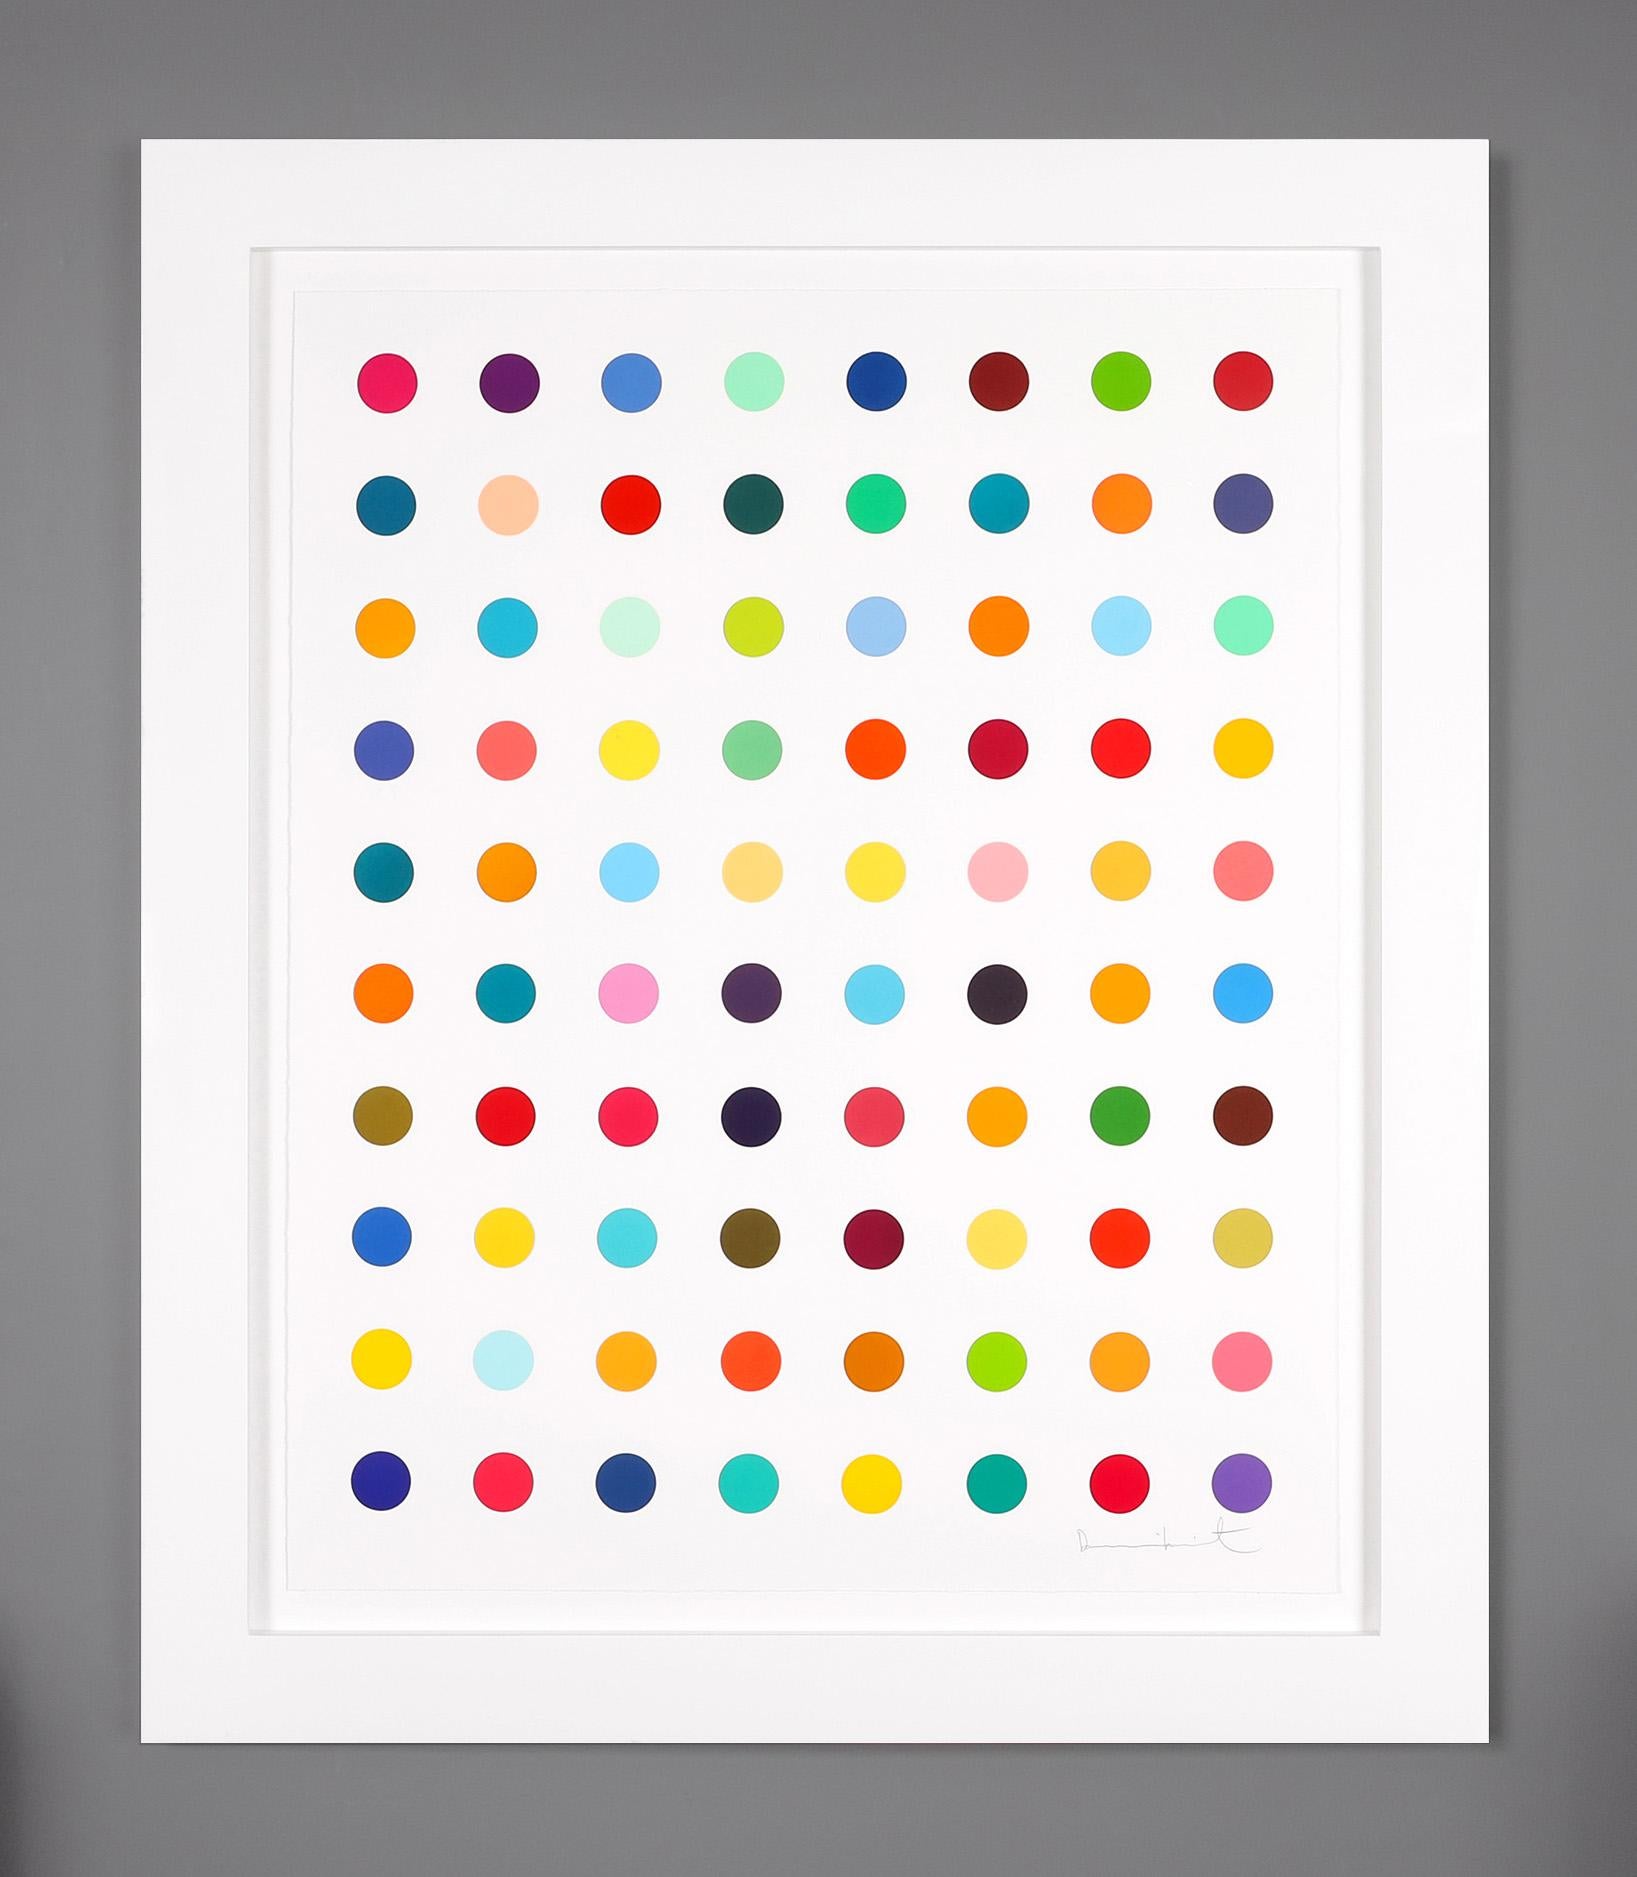 Damien Hirst 'Gly-Gly-Ala' Spots IV Spot Woodcut Print, 2016 For Sale 1